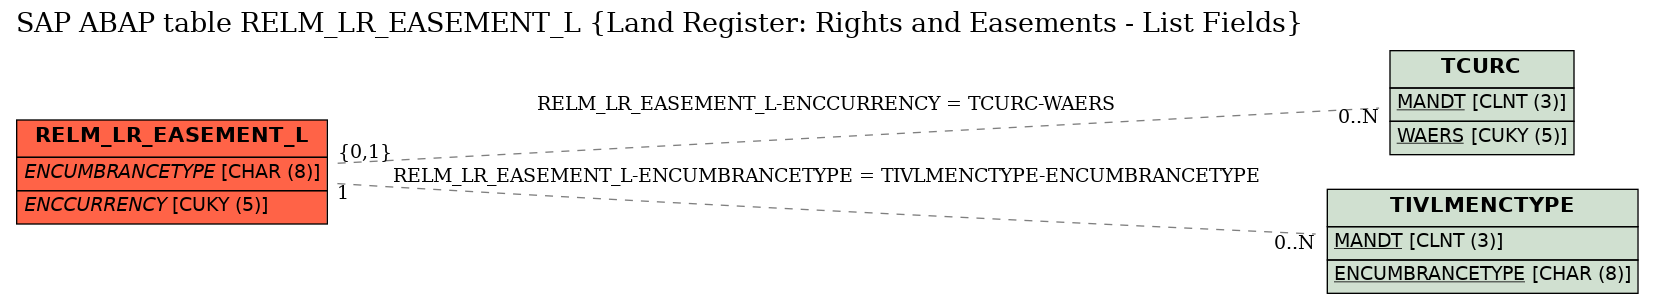 E-R Diagram for table RELM_LR_EASEMENT_L (Land Register: Rights and Easements - List Fields)